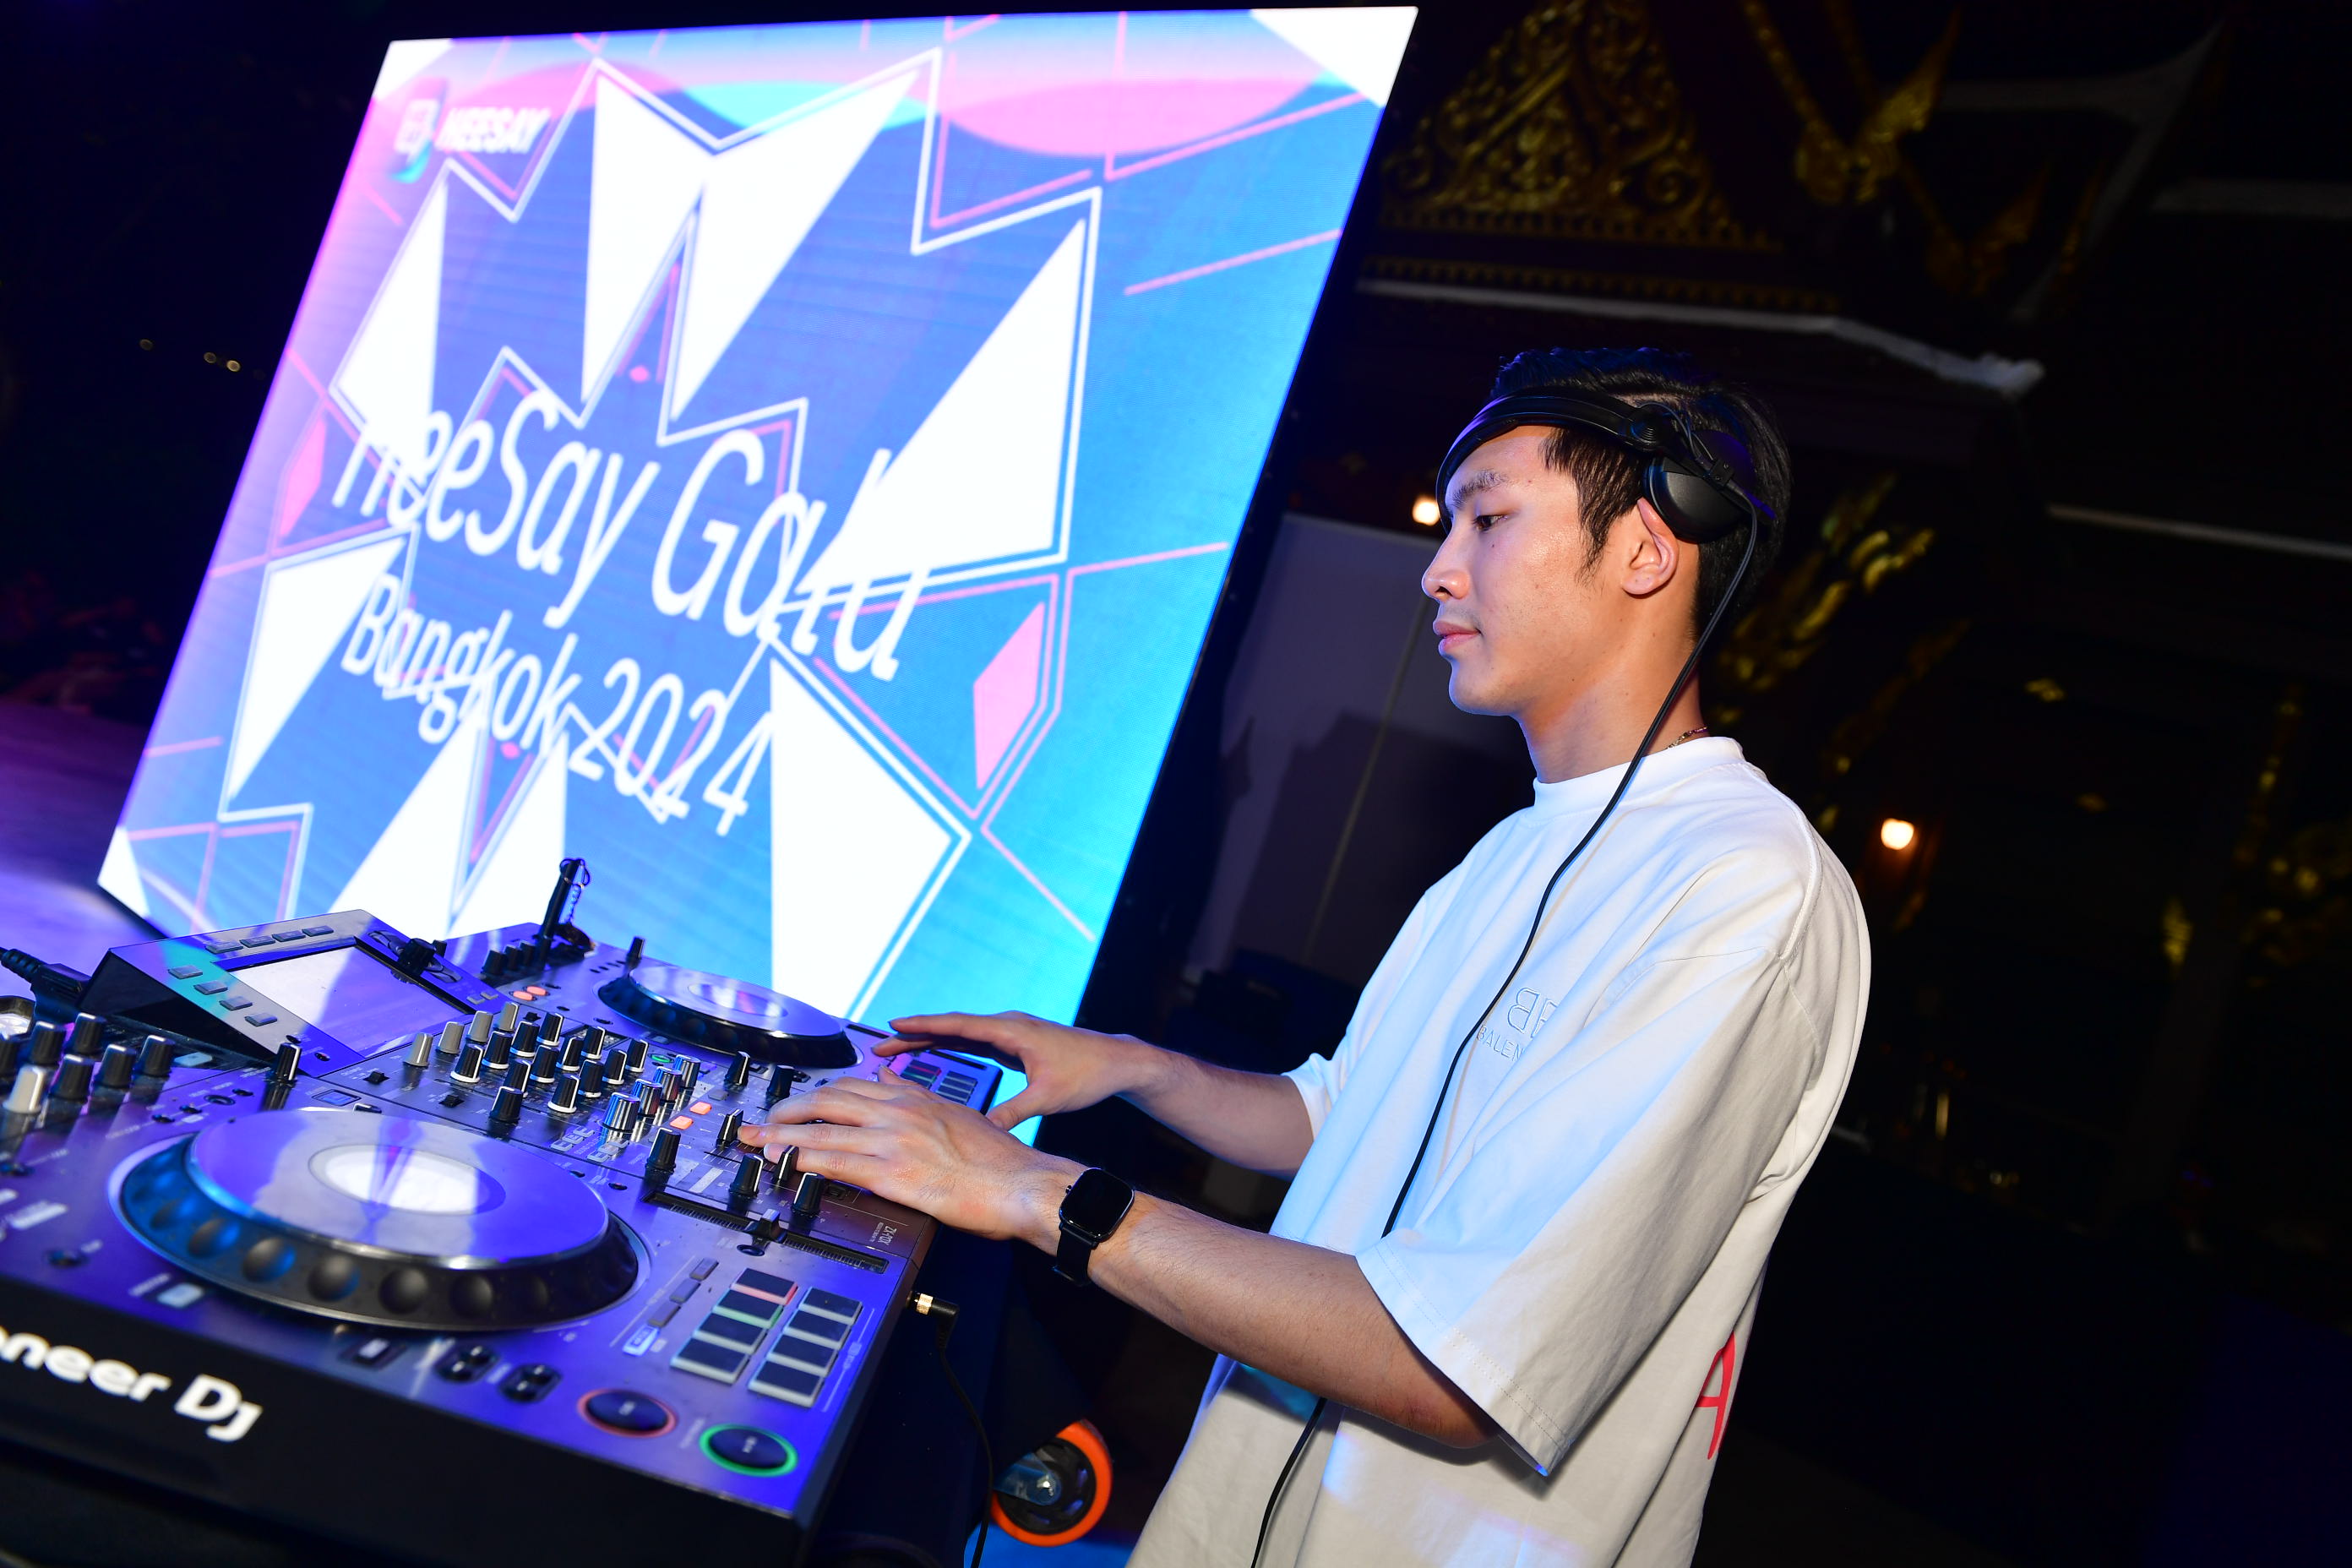 HeeSay Gala Captures Public Attention in Bangkok, Opening New Chapter for LGBTQ+ Online Community